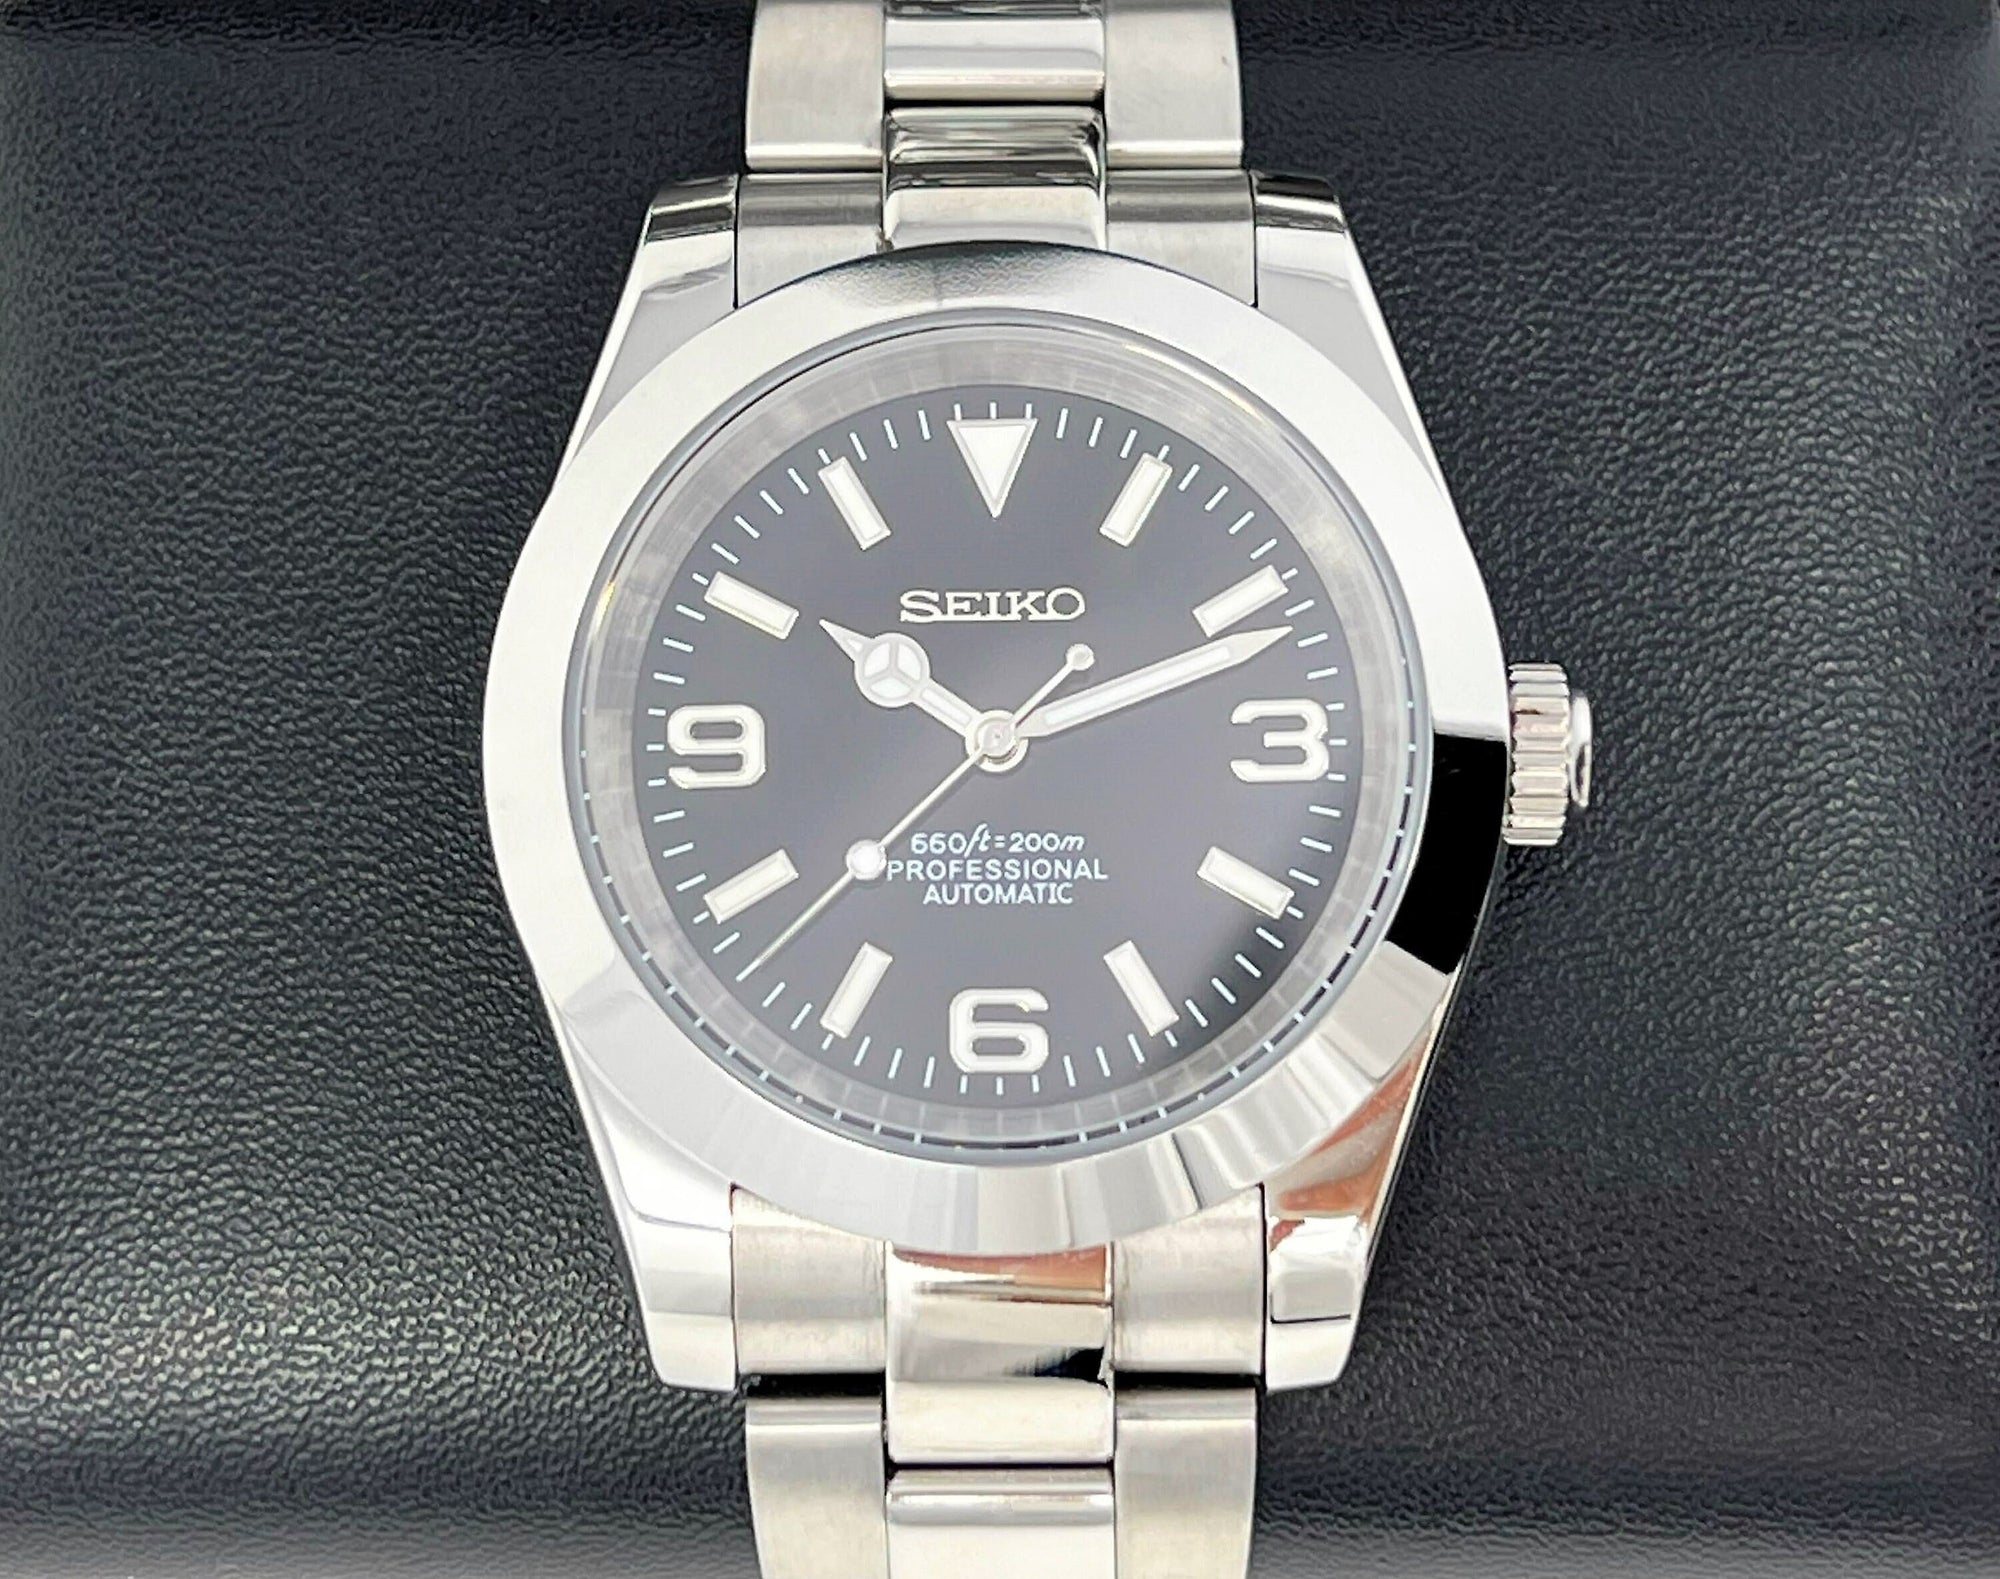 Seiko Explorer - Luxury Black -  36mm / 39mm - Stainless Steel - 36mm or 39mm - Automatic Watch - Custom Build - Ready to Ship!